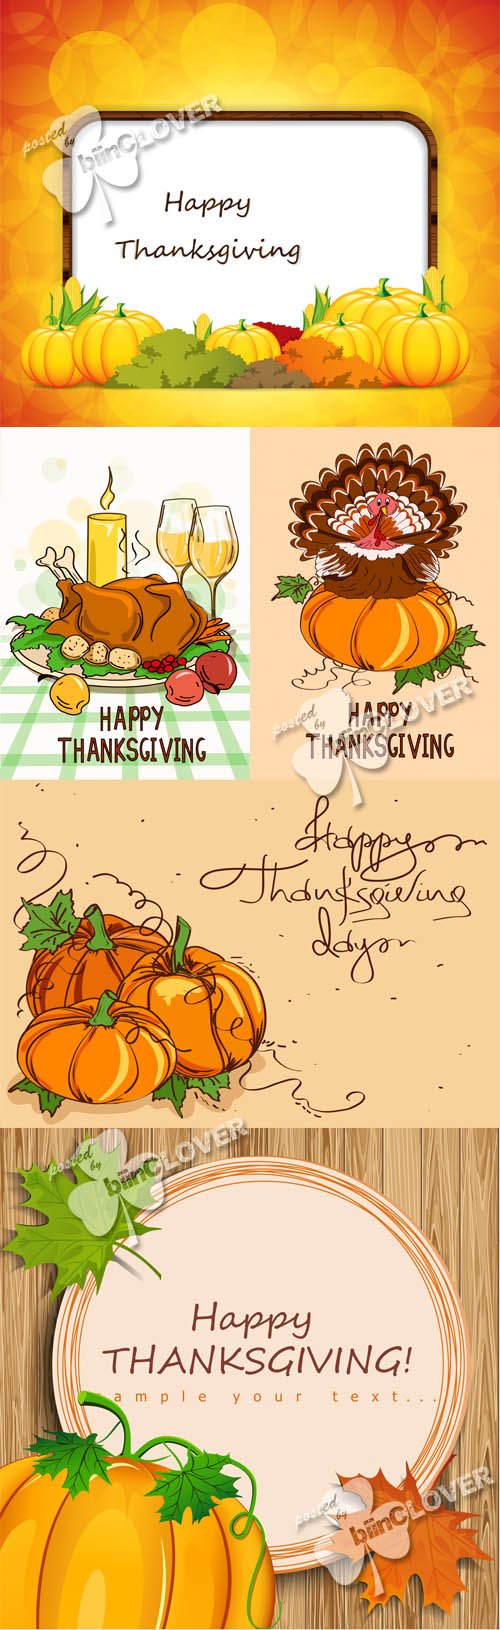 Thanksgiving cards 0513